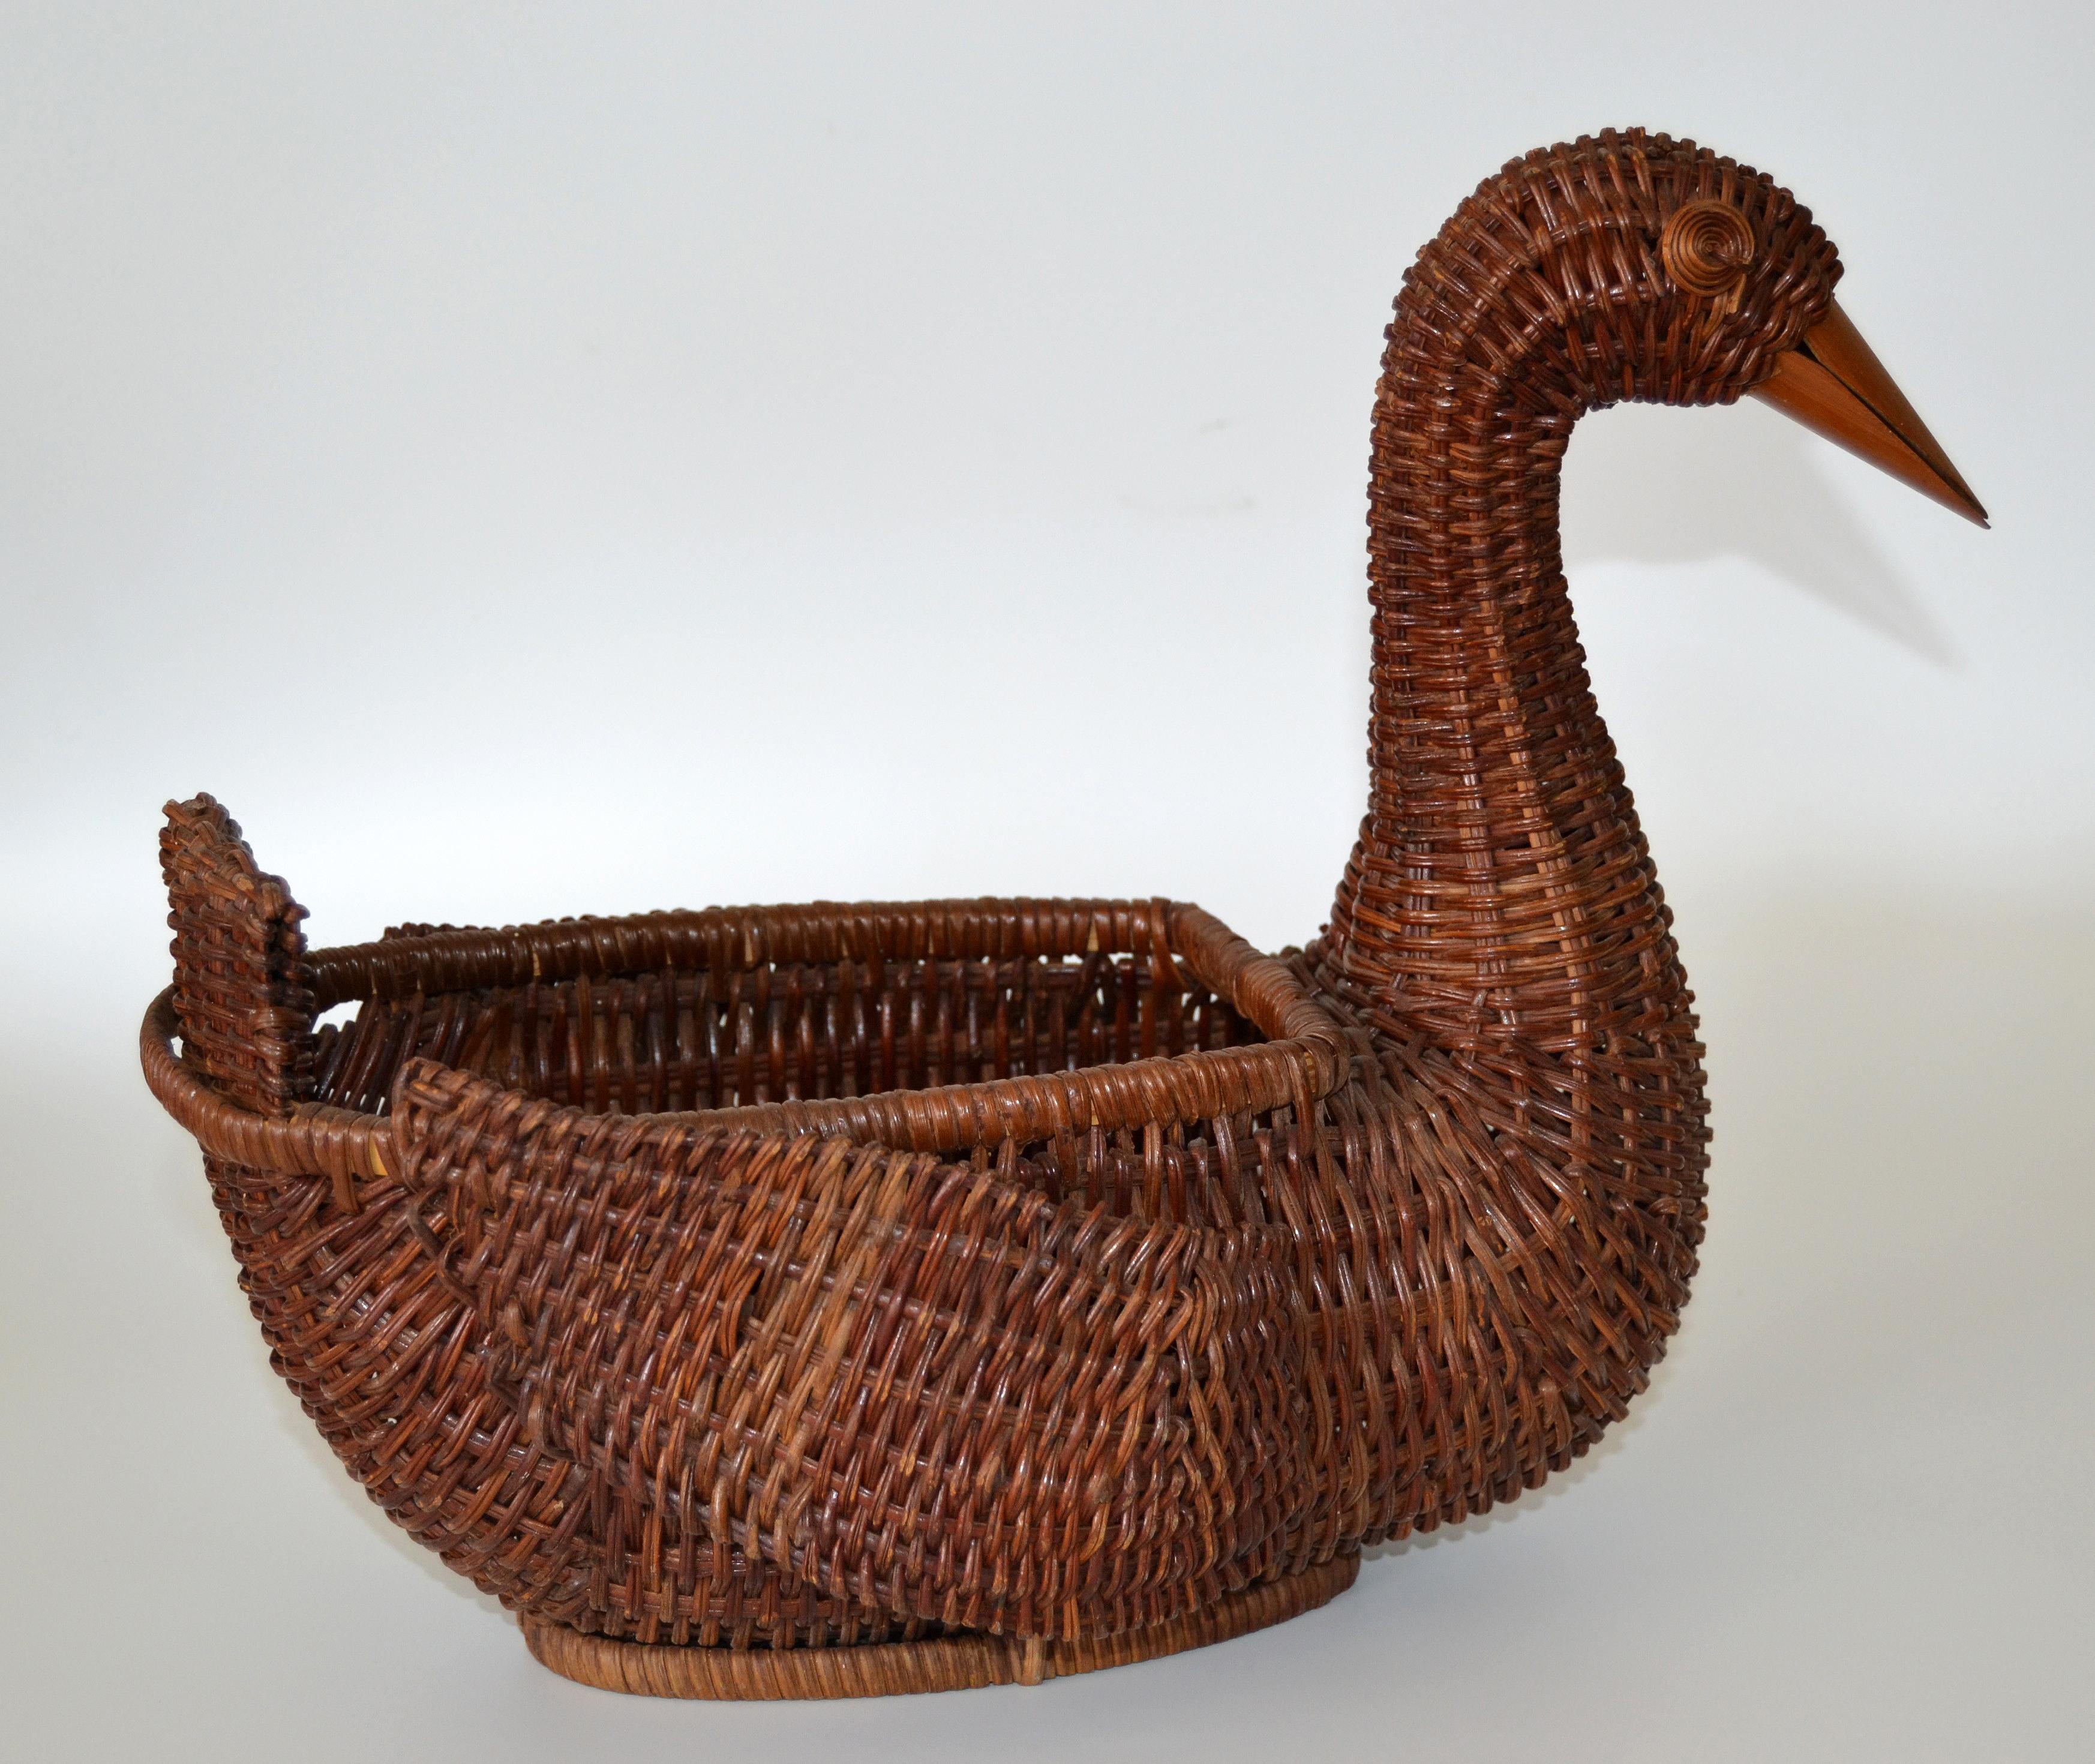 20th Century Boho Chic Decorative Handcrafted Woven Reed Brown Duck Basket, Animal Sculpture 